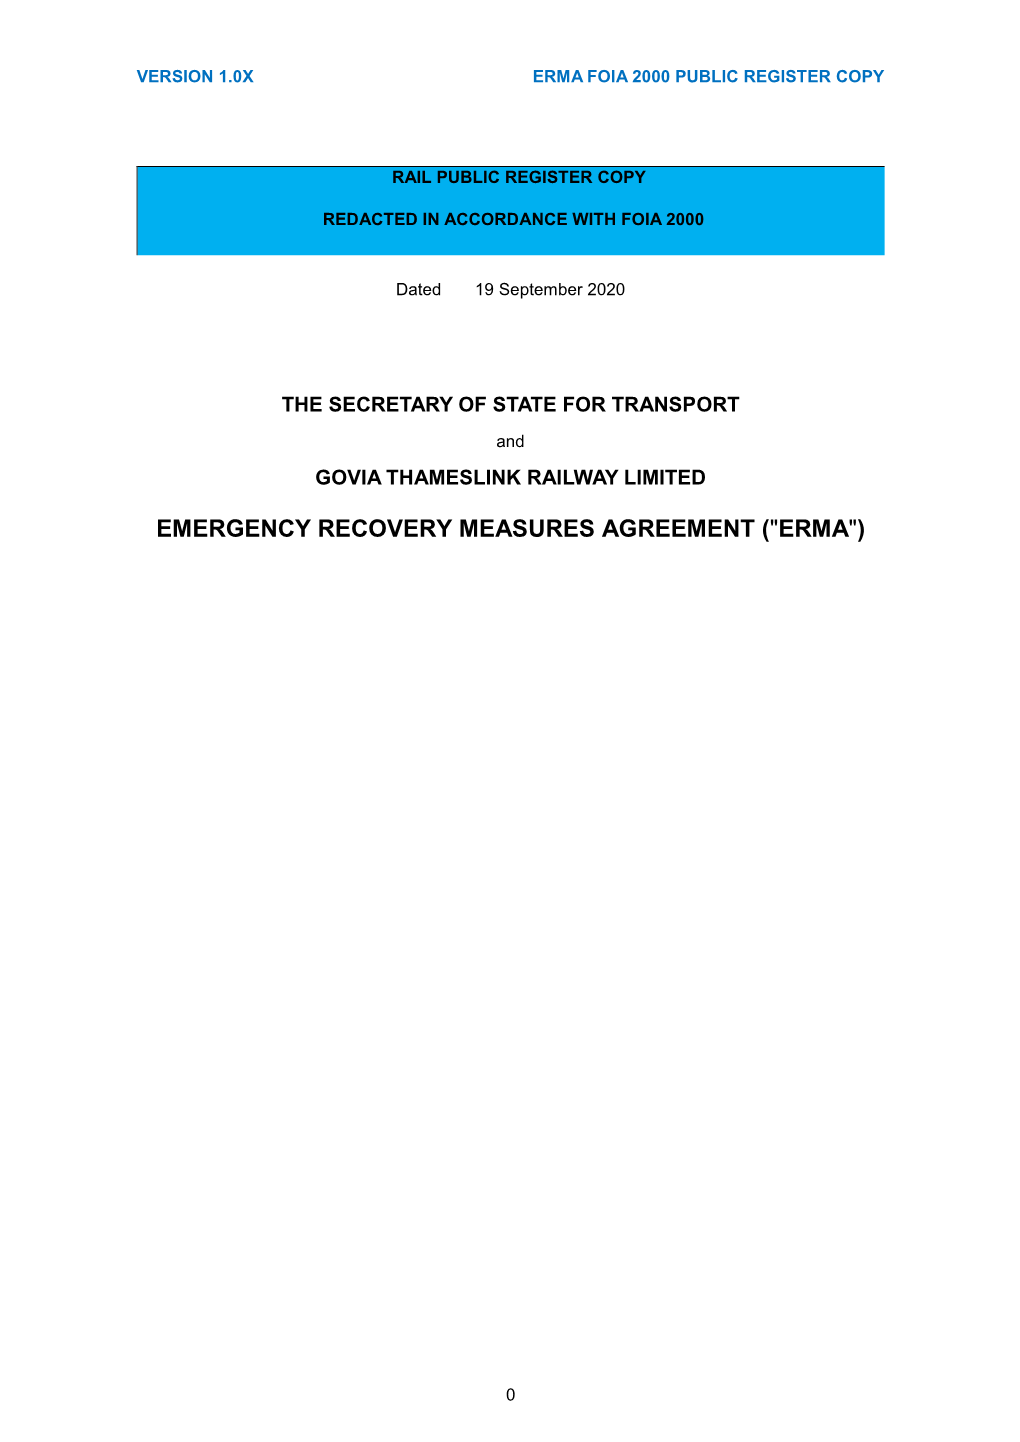 Emergency Recovery Measures Agreement ("Erma")